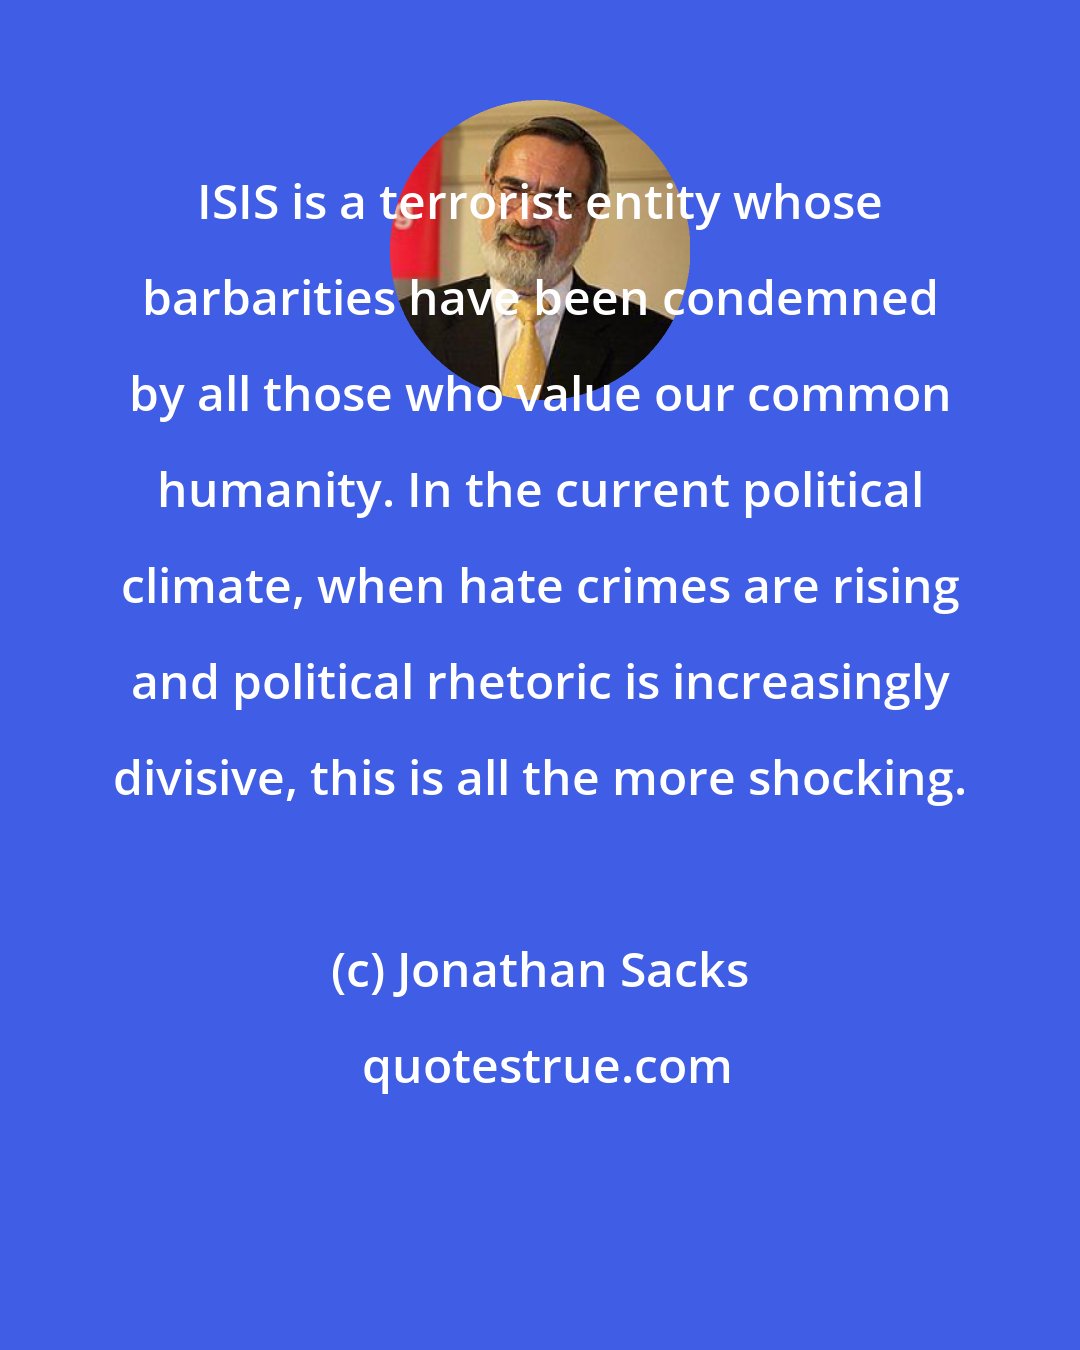 Jonathan Sacks: ISIS is a terrorist entity whose barbarities have been condemned by all those who value our common humanity. In the current political climate, when hate crimes are rising and political rhetoric is increasingly divisive, this is all the more shocking.